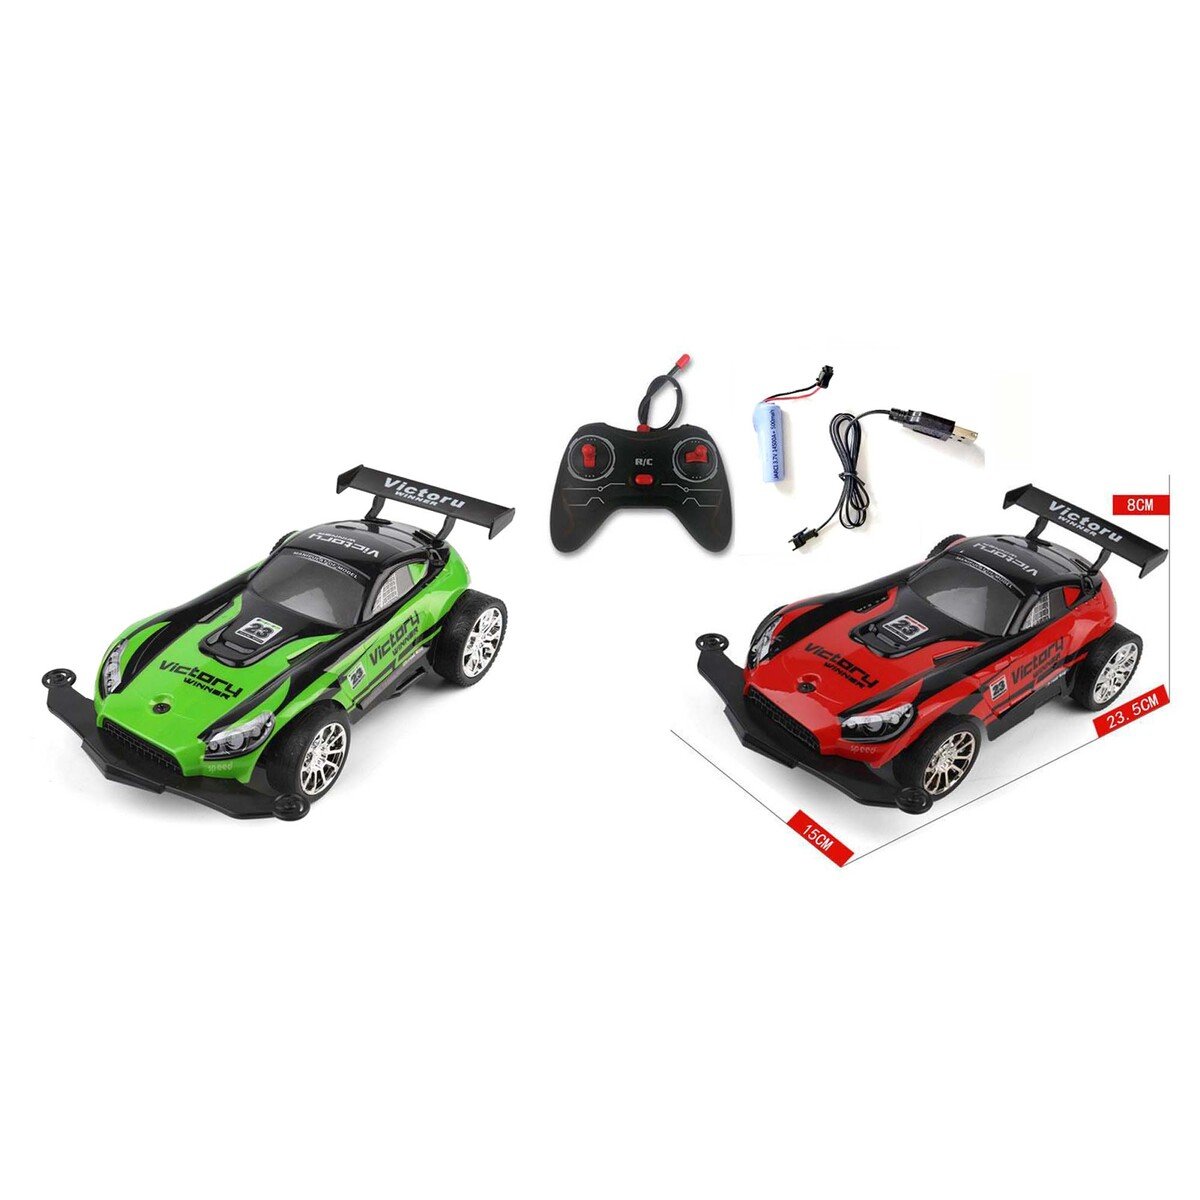 Skid Fusion Rechargeable Remote Control Car 863B-3